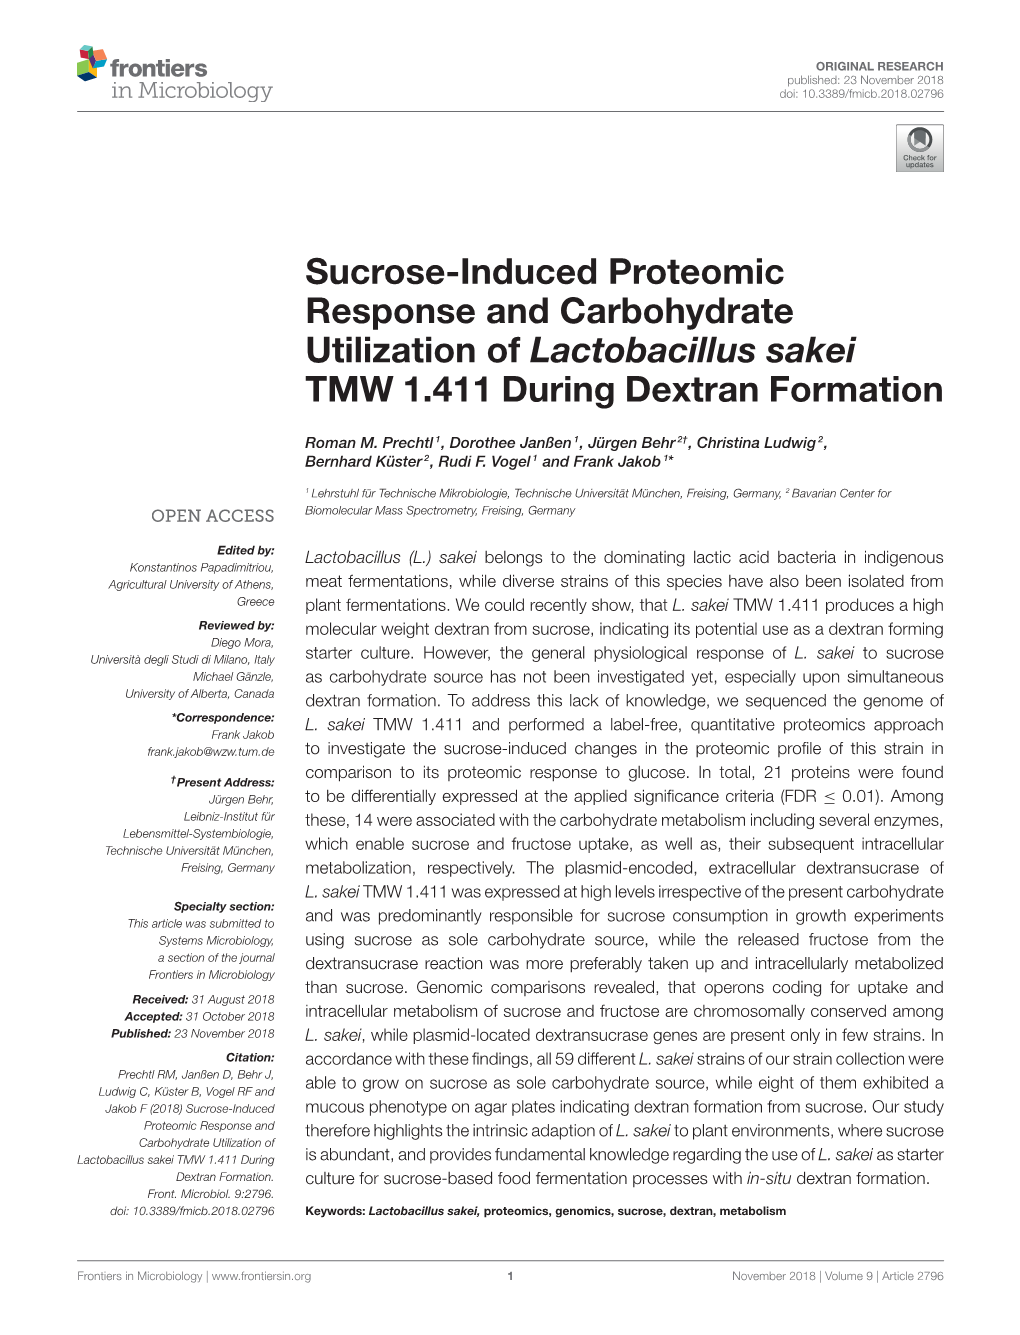 Sucrose-Induced Proteomic Response and Carbohydrate Utilization of Lactobacillus Sakei TMW 1.411 During Dextran Formation